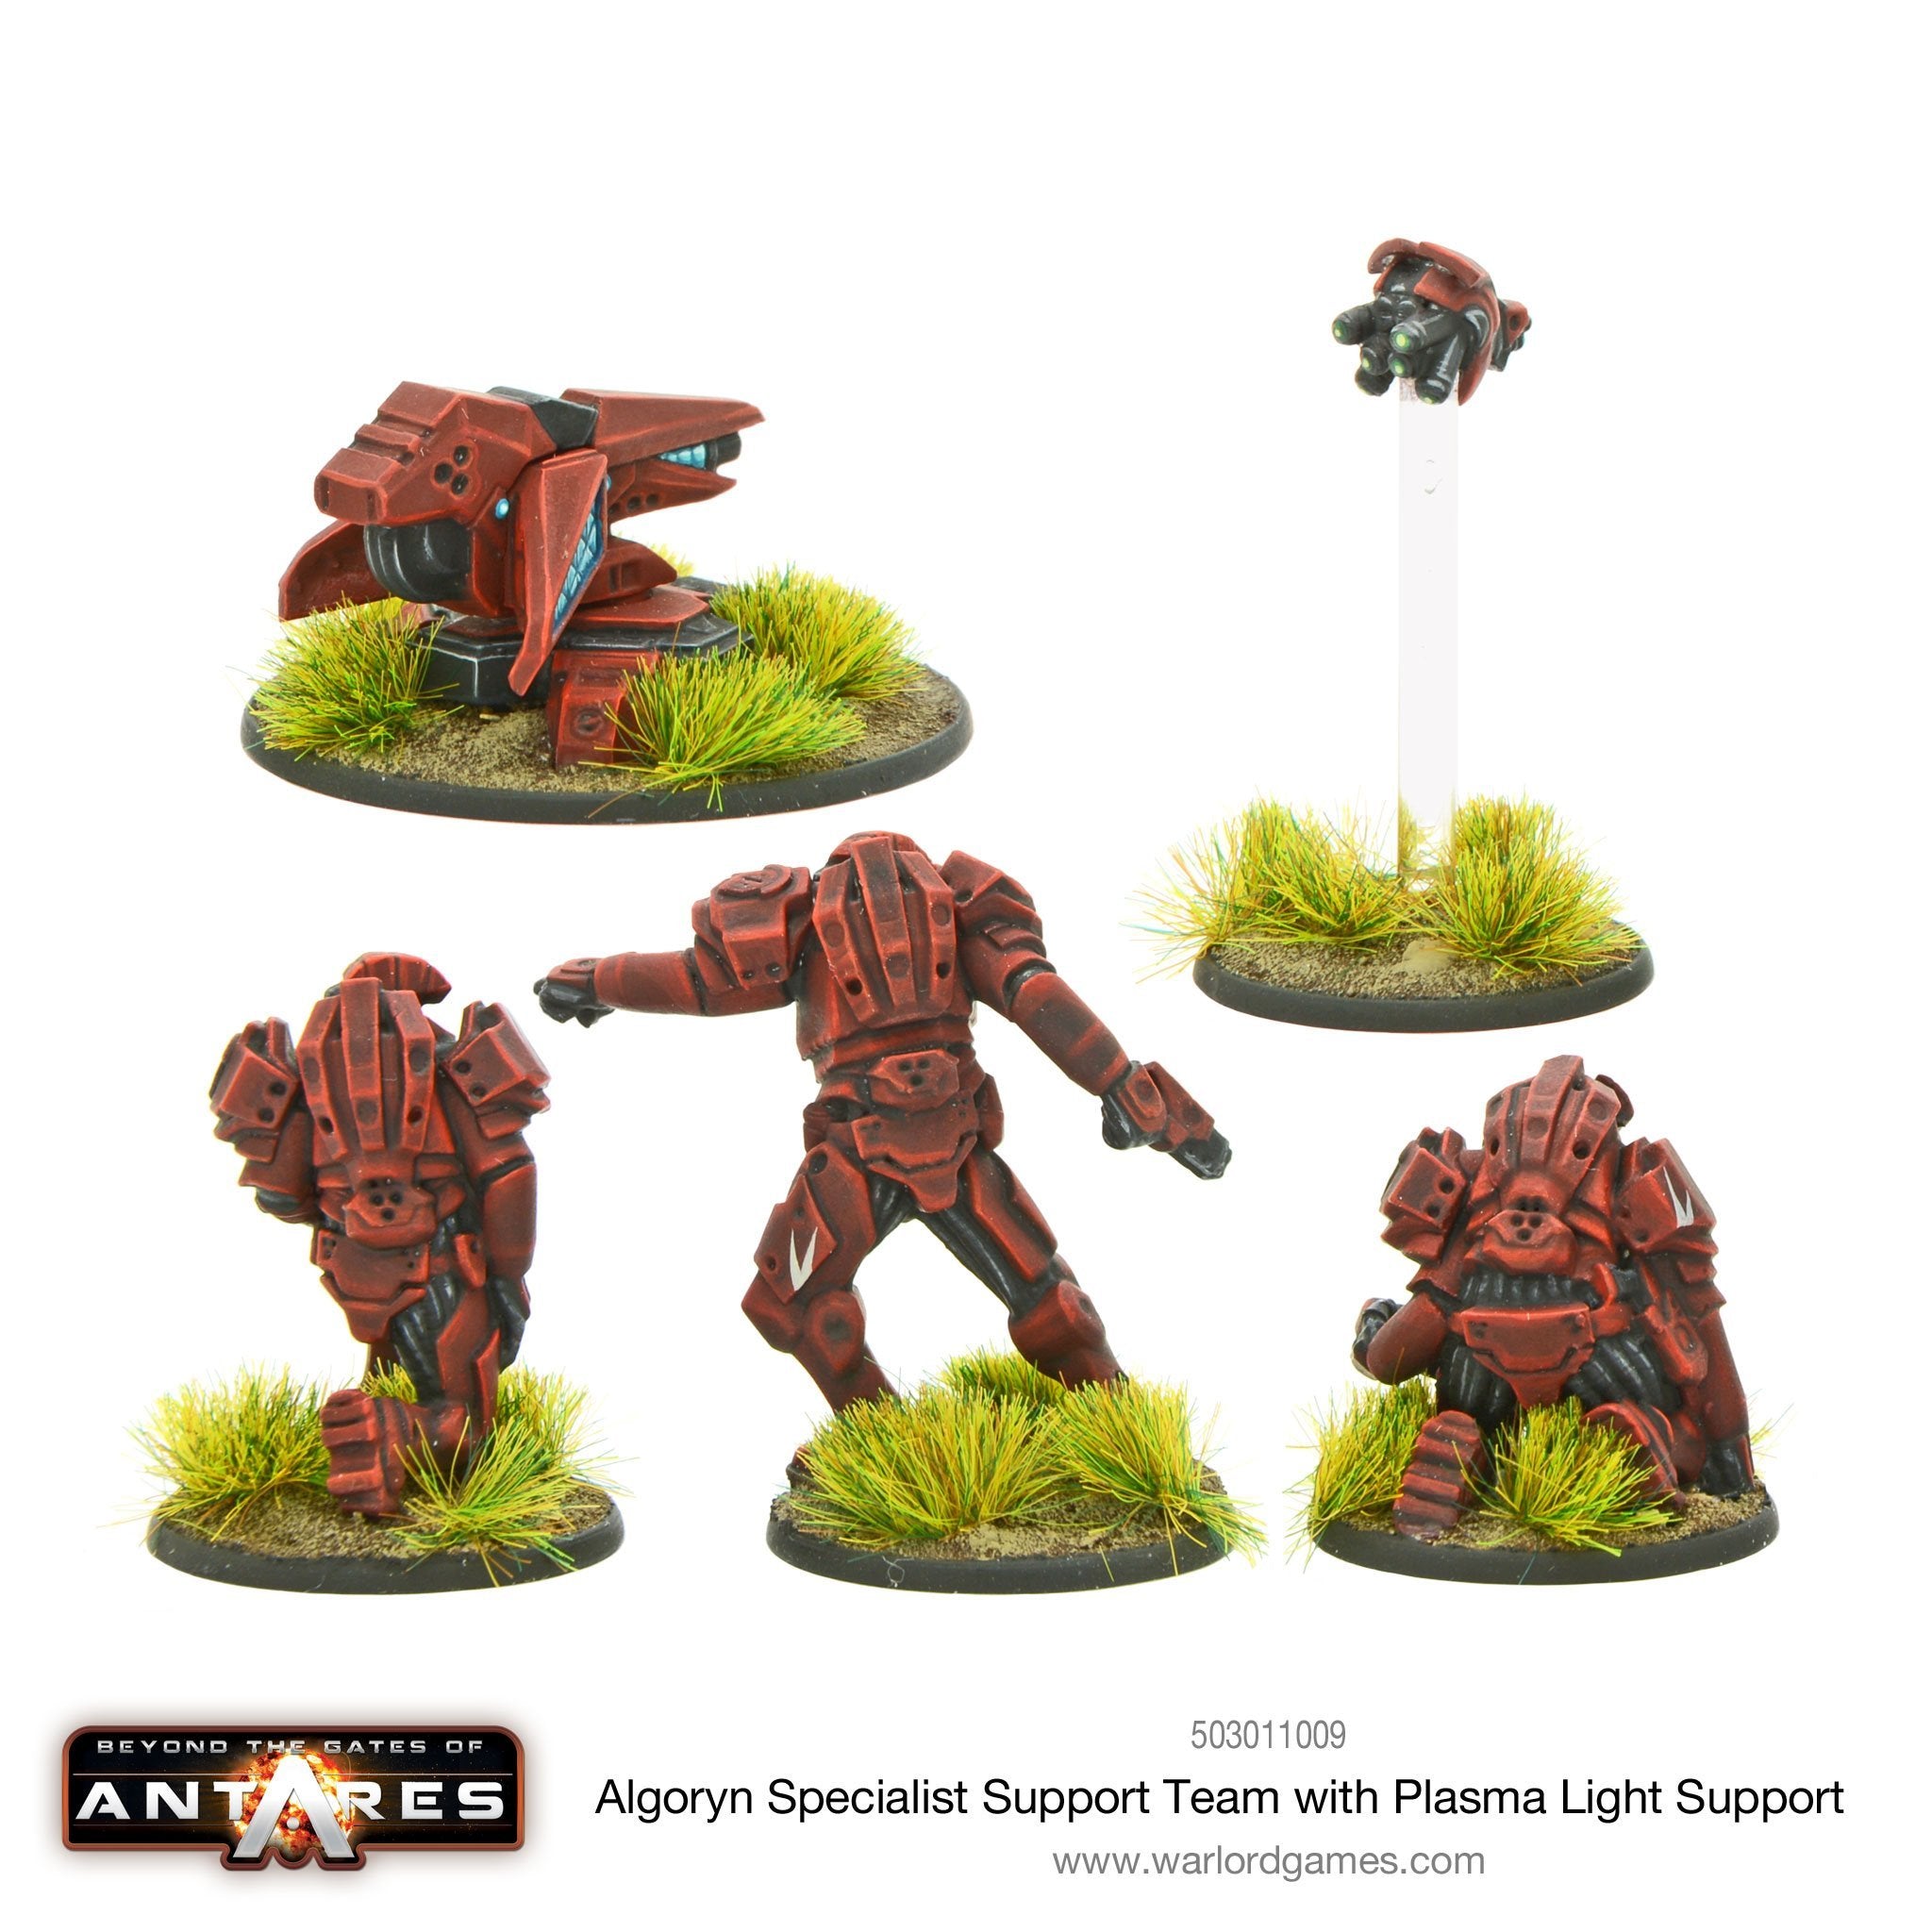 Algoryn specialist support team with plasma light support